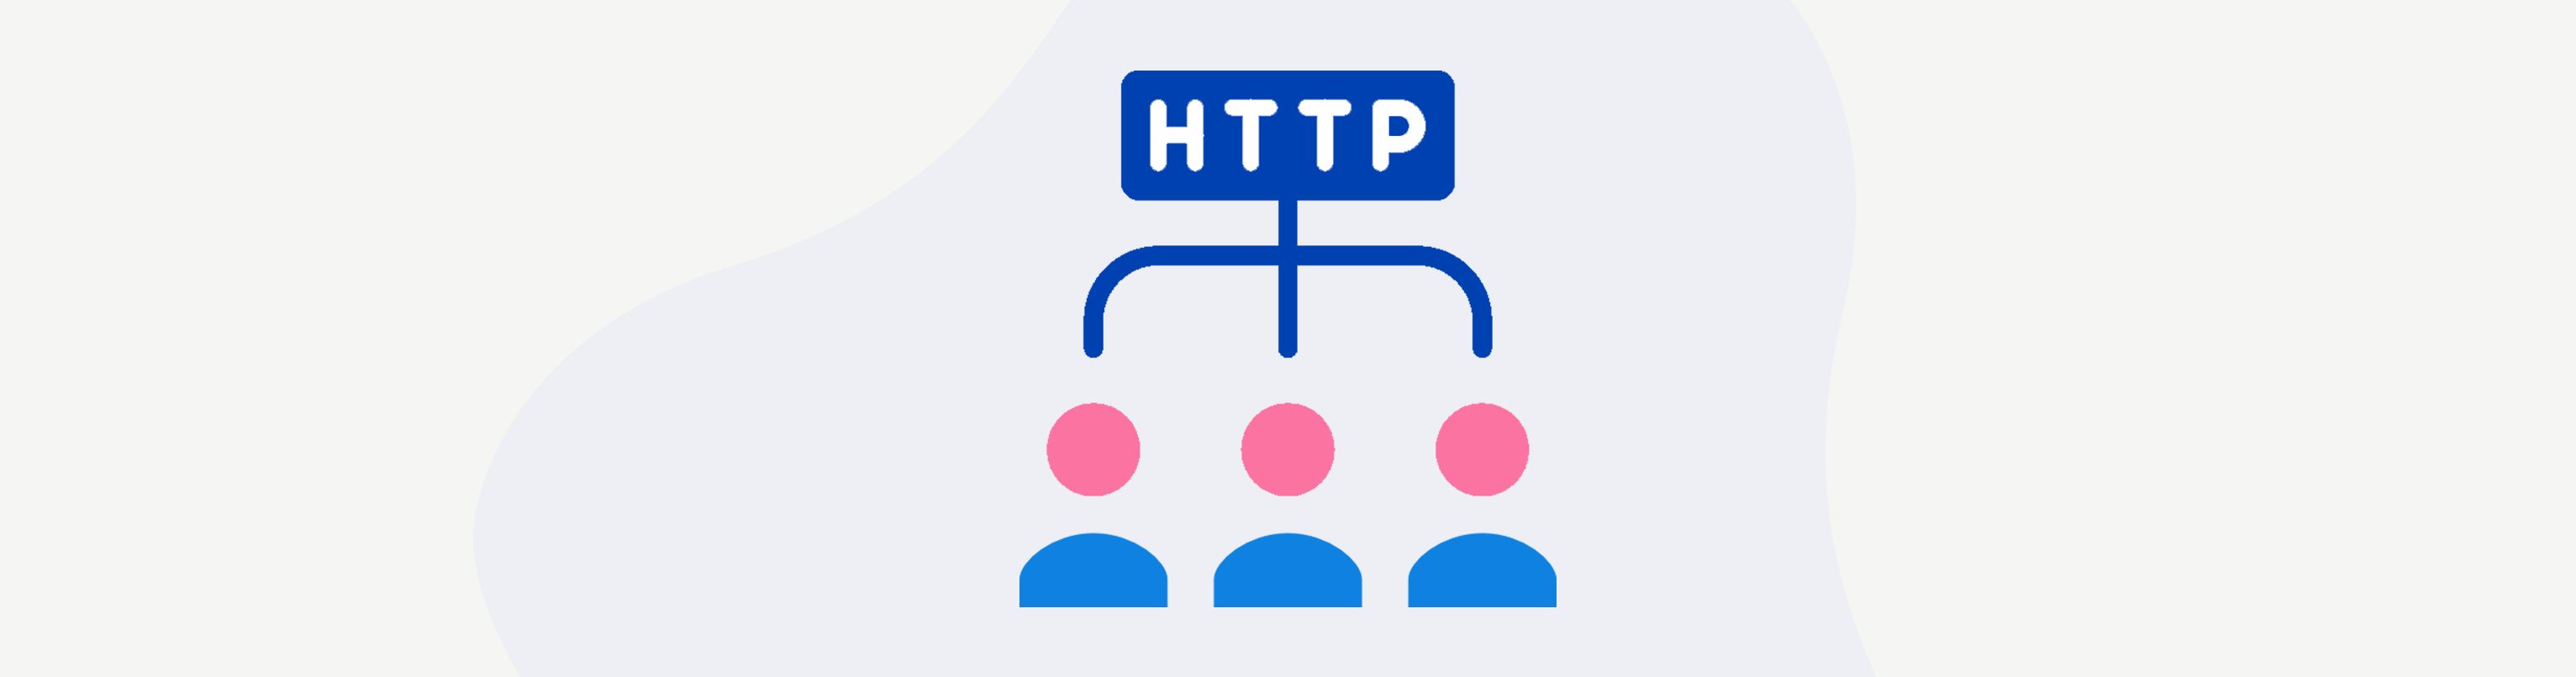 Minimize Your HTTP Requests